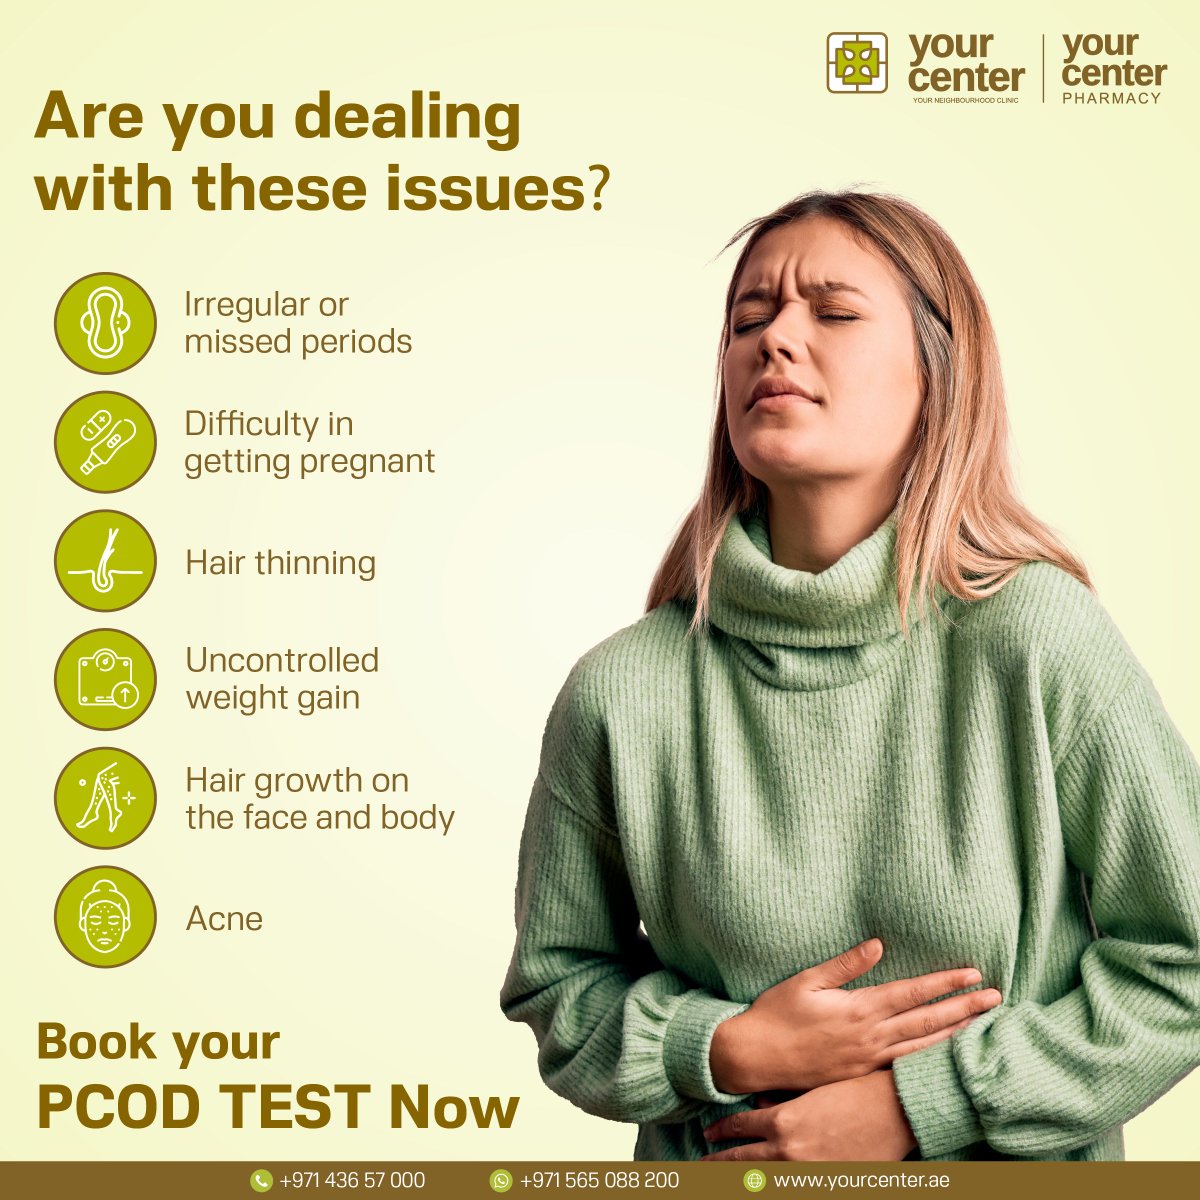 Don't Let PCOD go unnoticed, Book your test today and start a healthy living!

📍Your Center Polyclinic
Afnan 3 Building, Midtown, Dubai Production City

📞 +971 565088200

#pcodtestdubai #healthylivingdubai #impzdubai #dubaiproductioncity #dubaiclinic